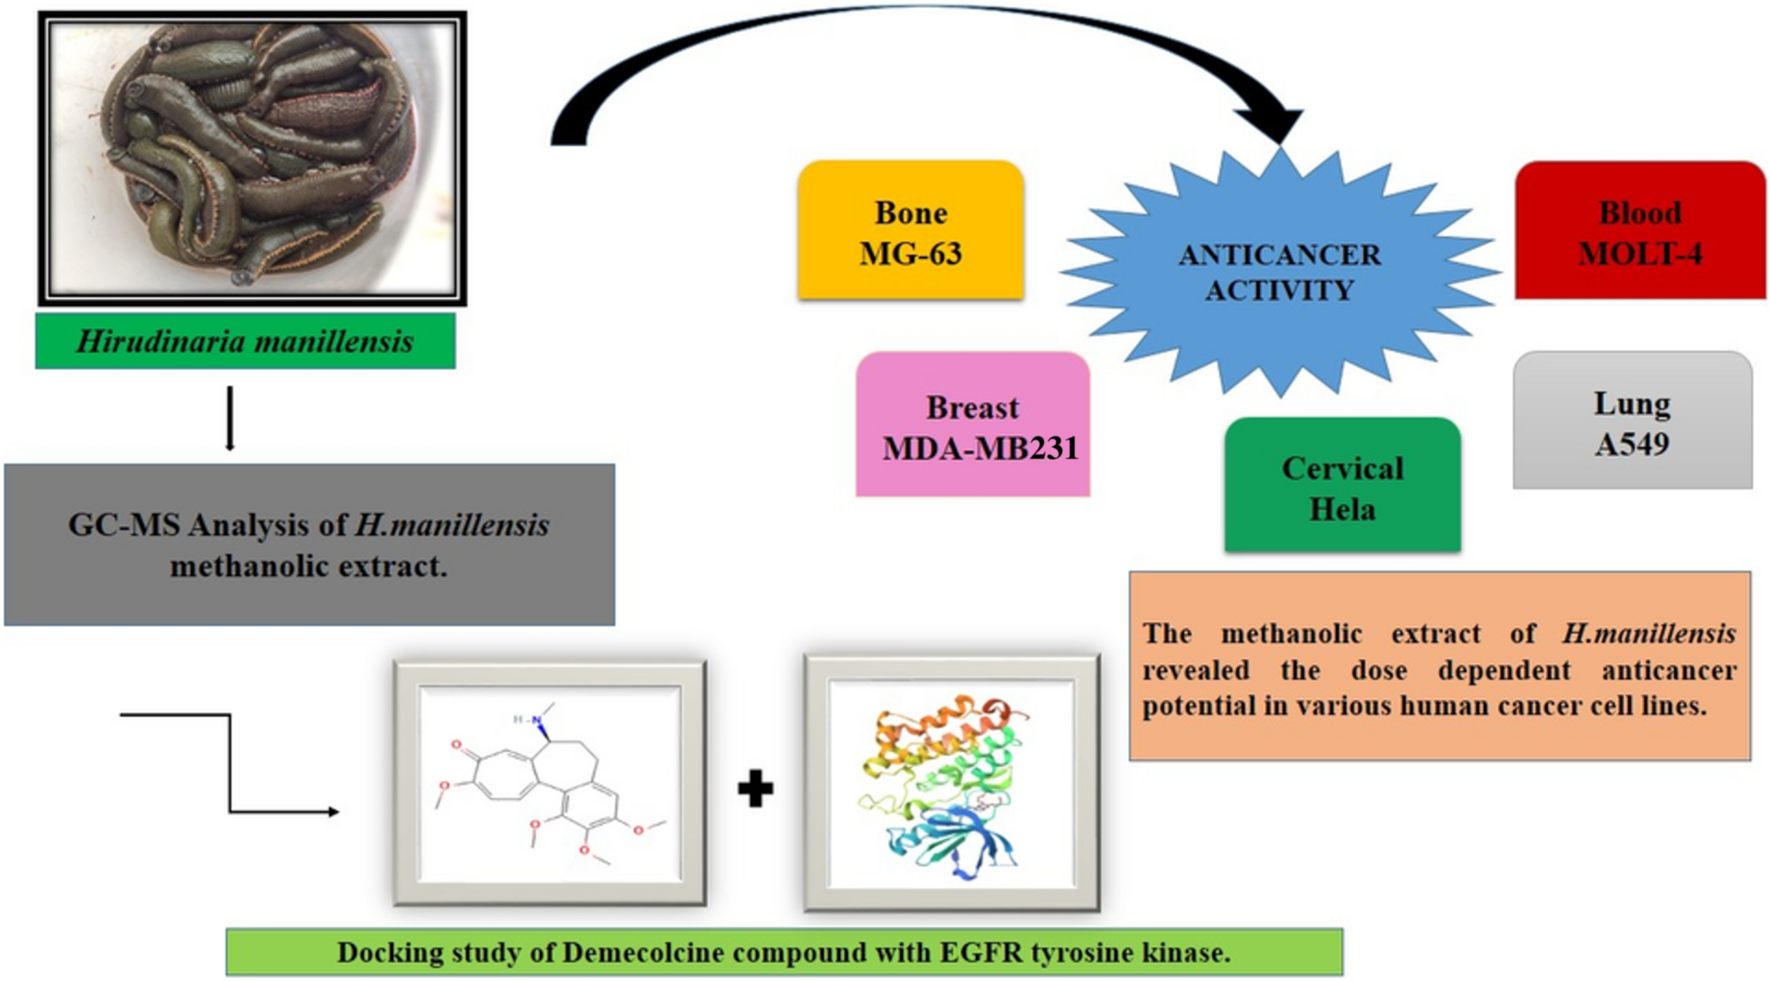 In vitro anticancer activity of Hirudinaria manillensis methanolic extract and its validation using in silico molecular docking approach